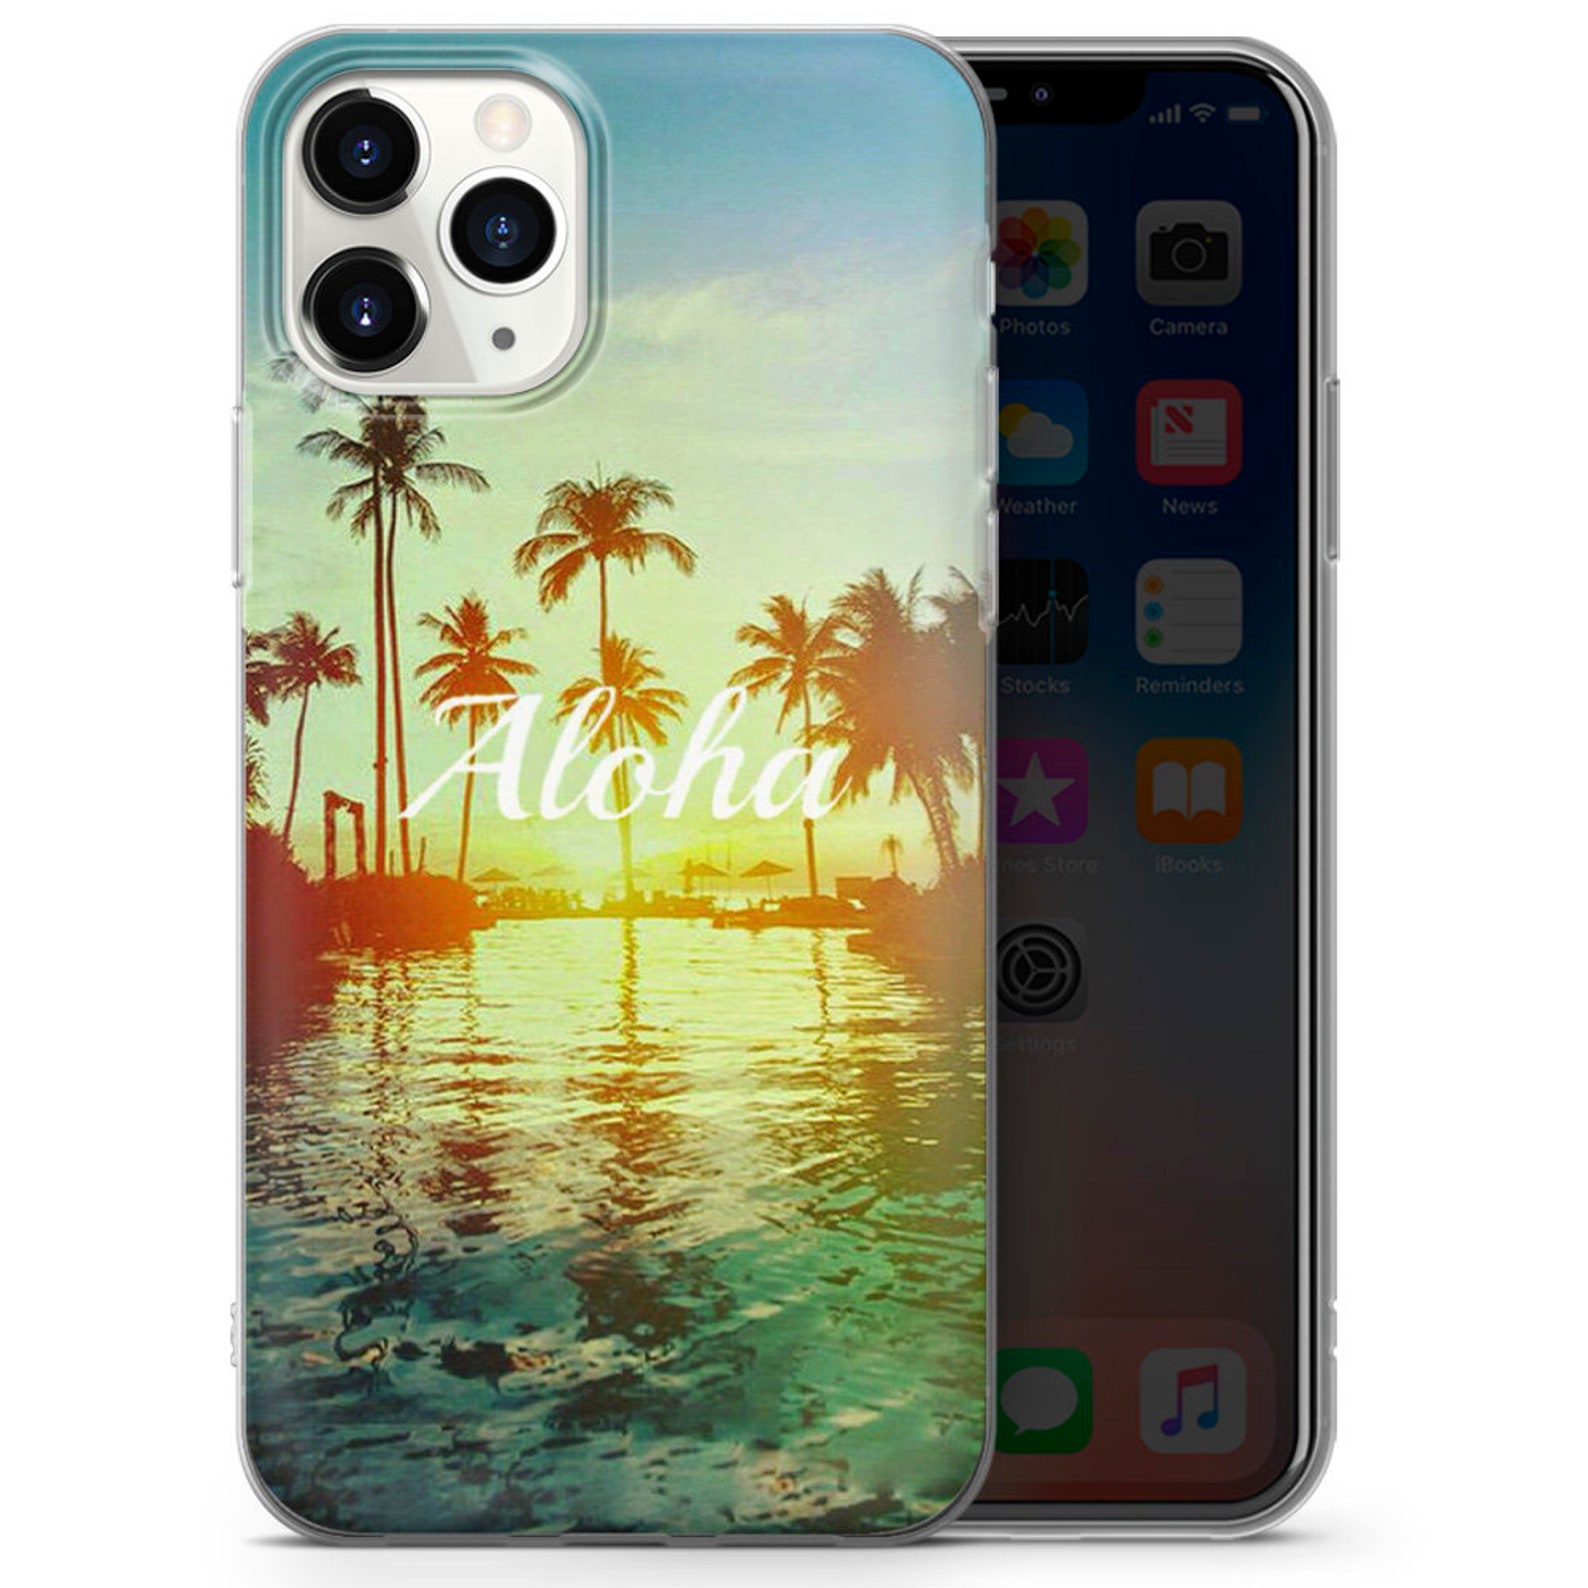 Hawaii Phone Case Cover for Iphone 7 8 XS XR 11PRO & - Etsy